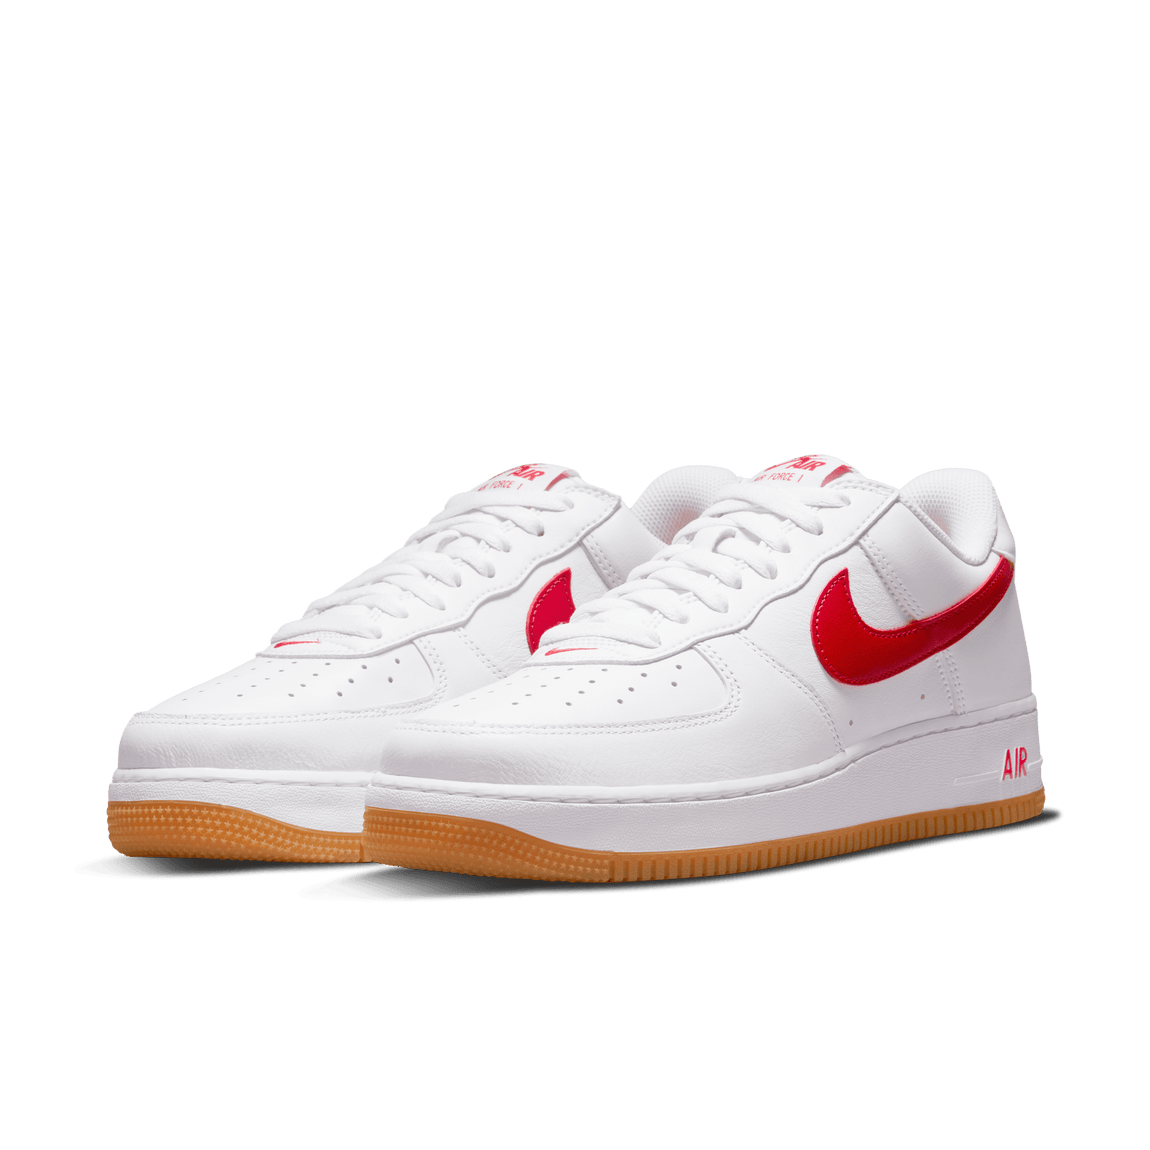 Nike Air Force 1 Low Retro (White/University Red/Gum-Yellow) - Nike Air Force 1 Low Retro (White/University Red/Gum-Yellow) - 